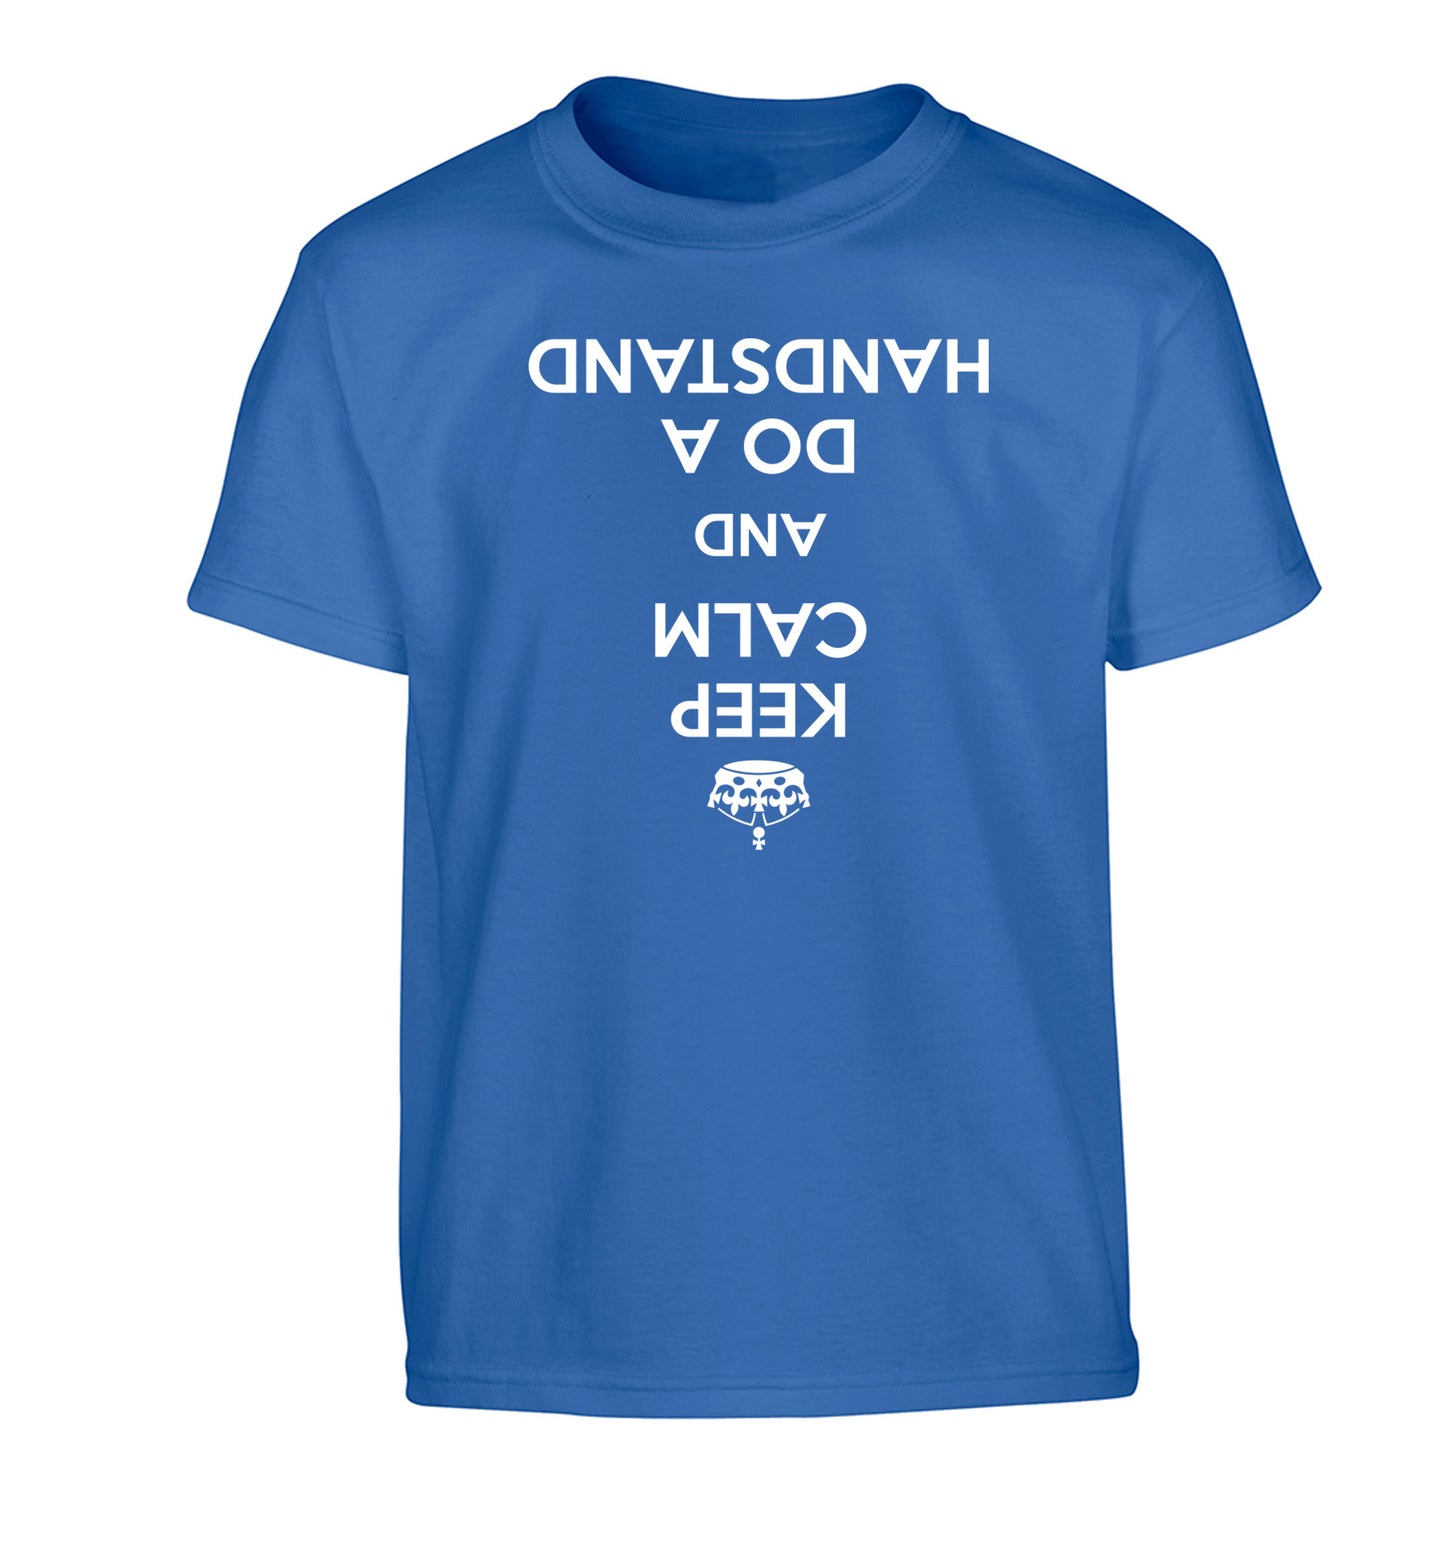 Keep calm and do a handstand Children's blue Tshirt 12-13 Years